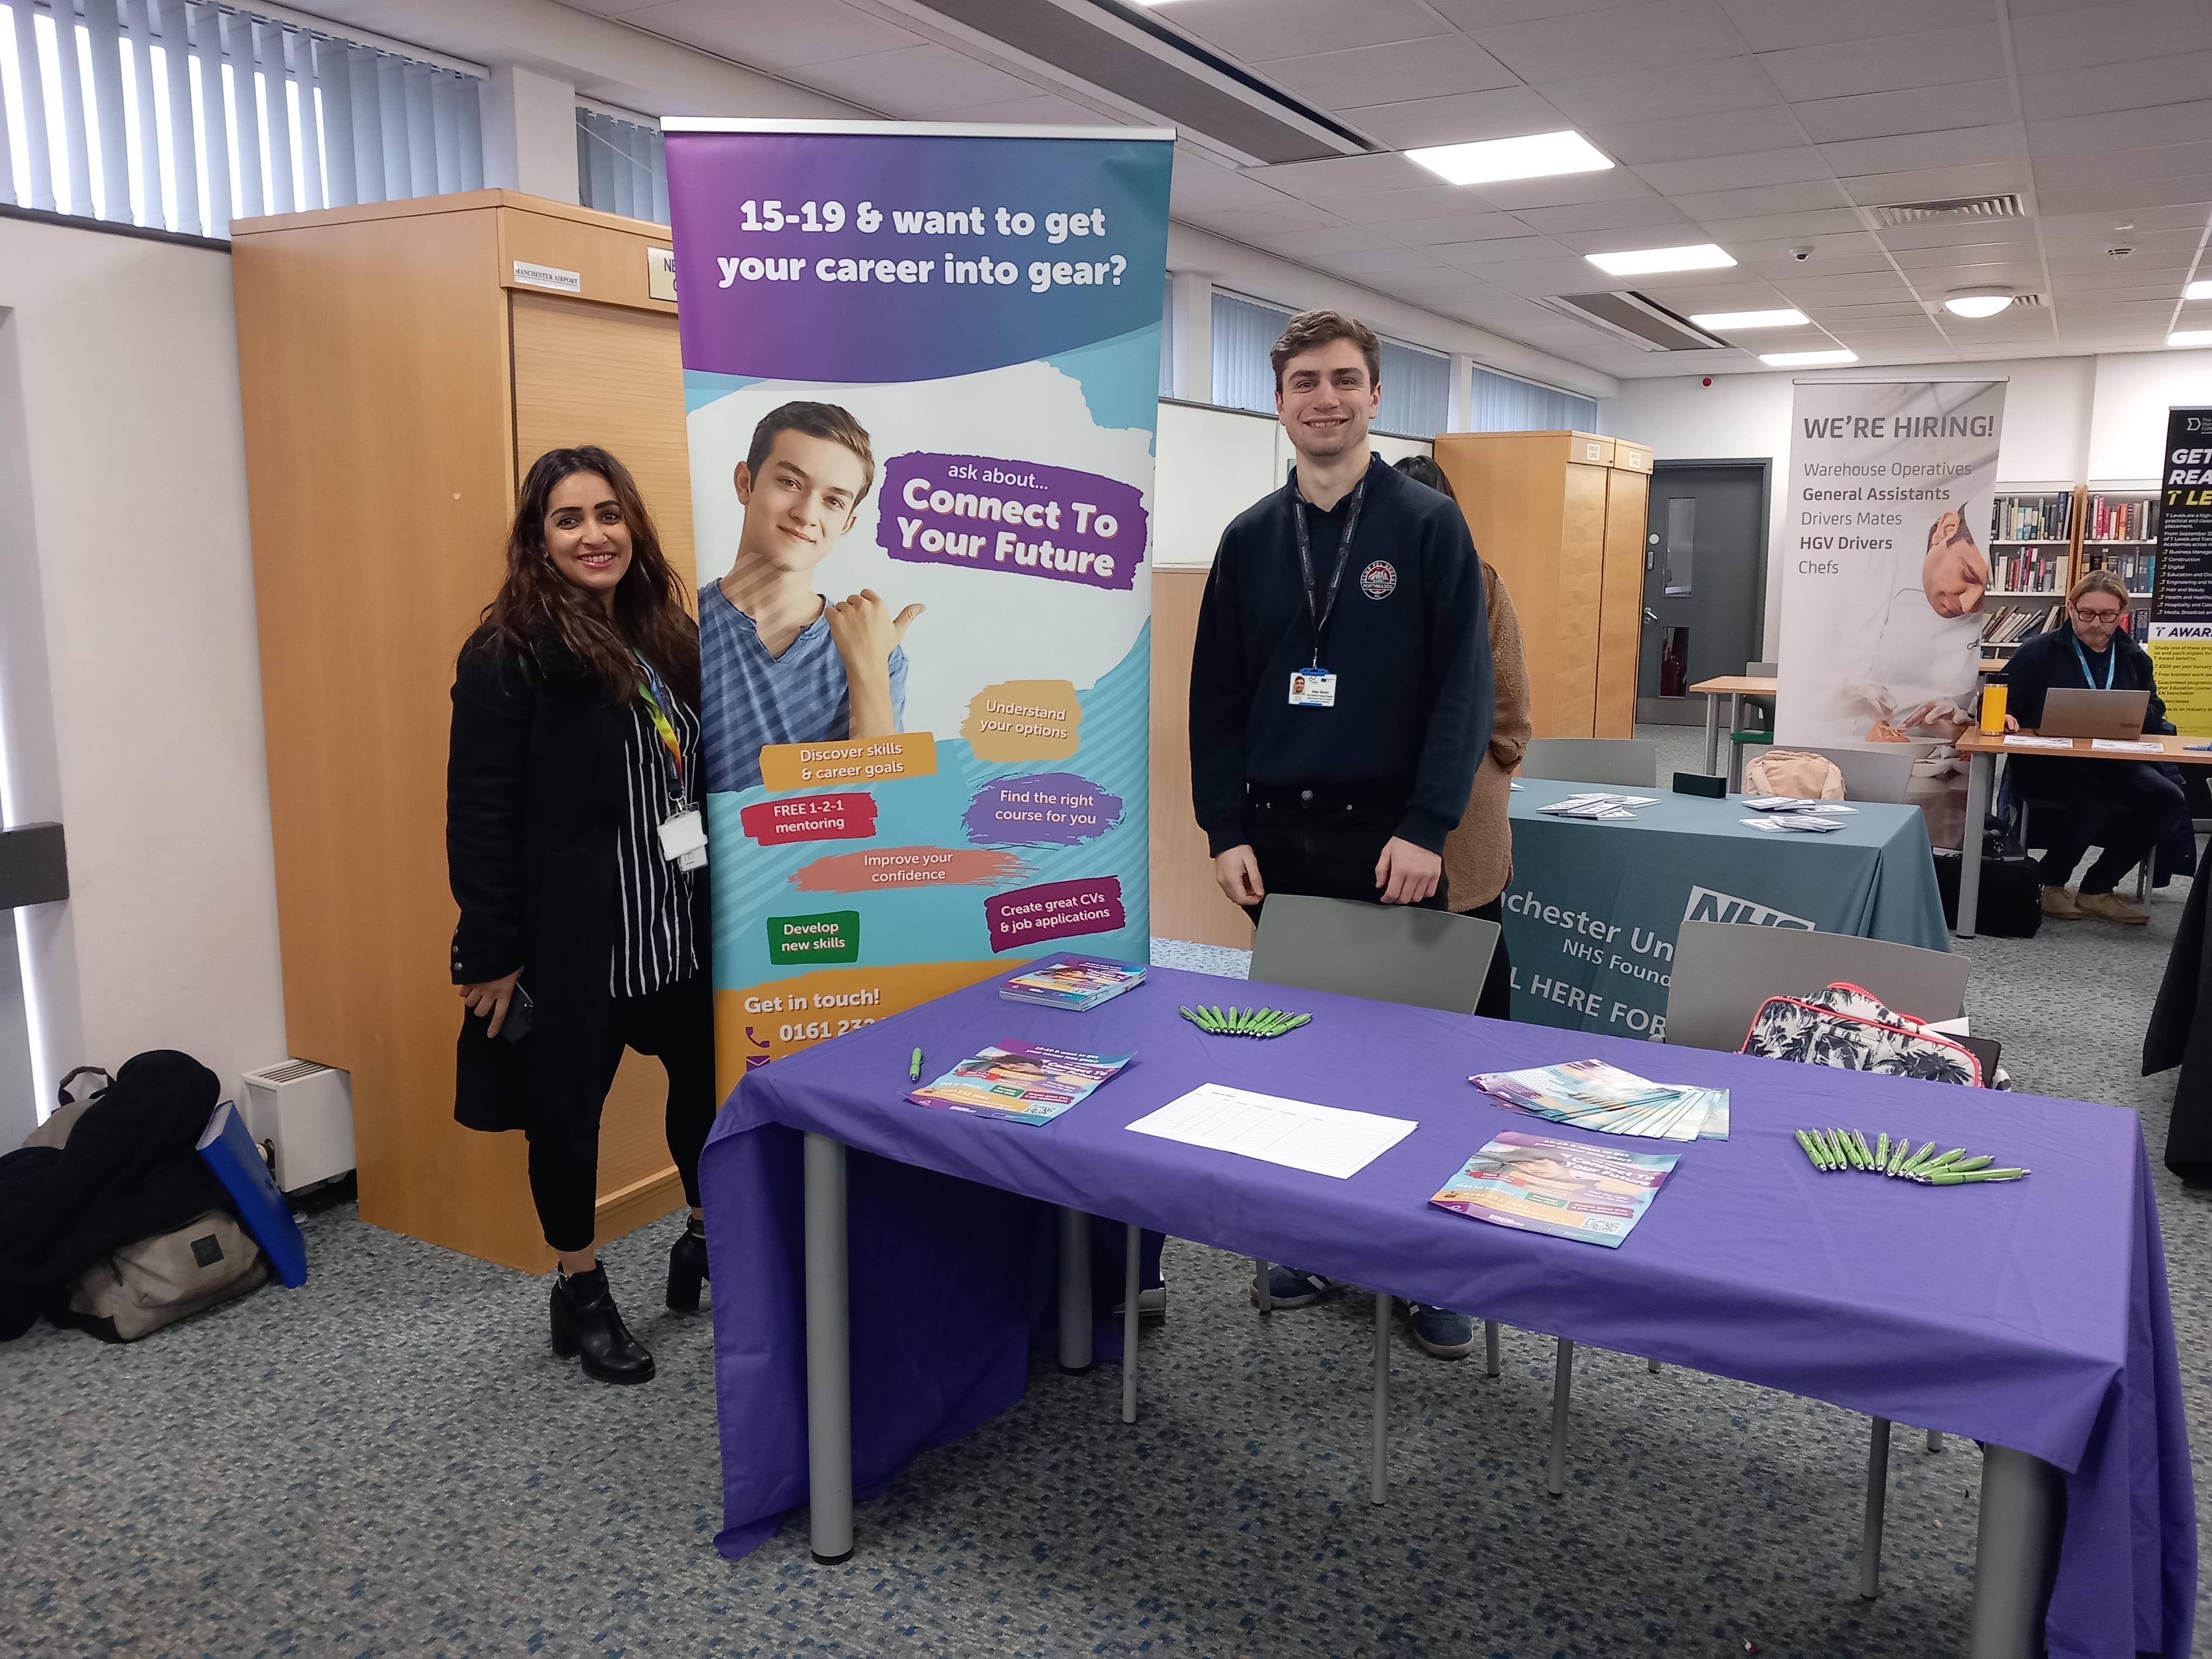 This image shows two careers advisers at a Connect To Your Future (CTYF) careers event.